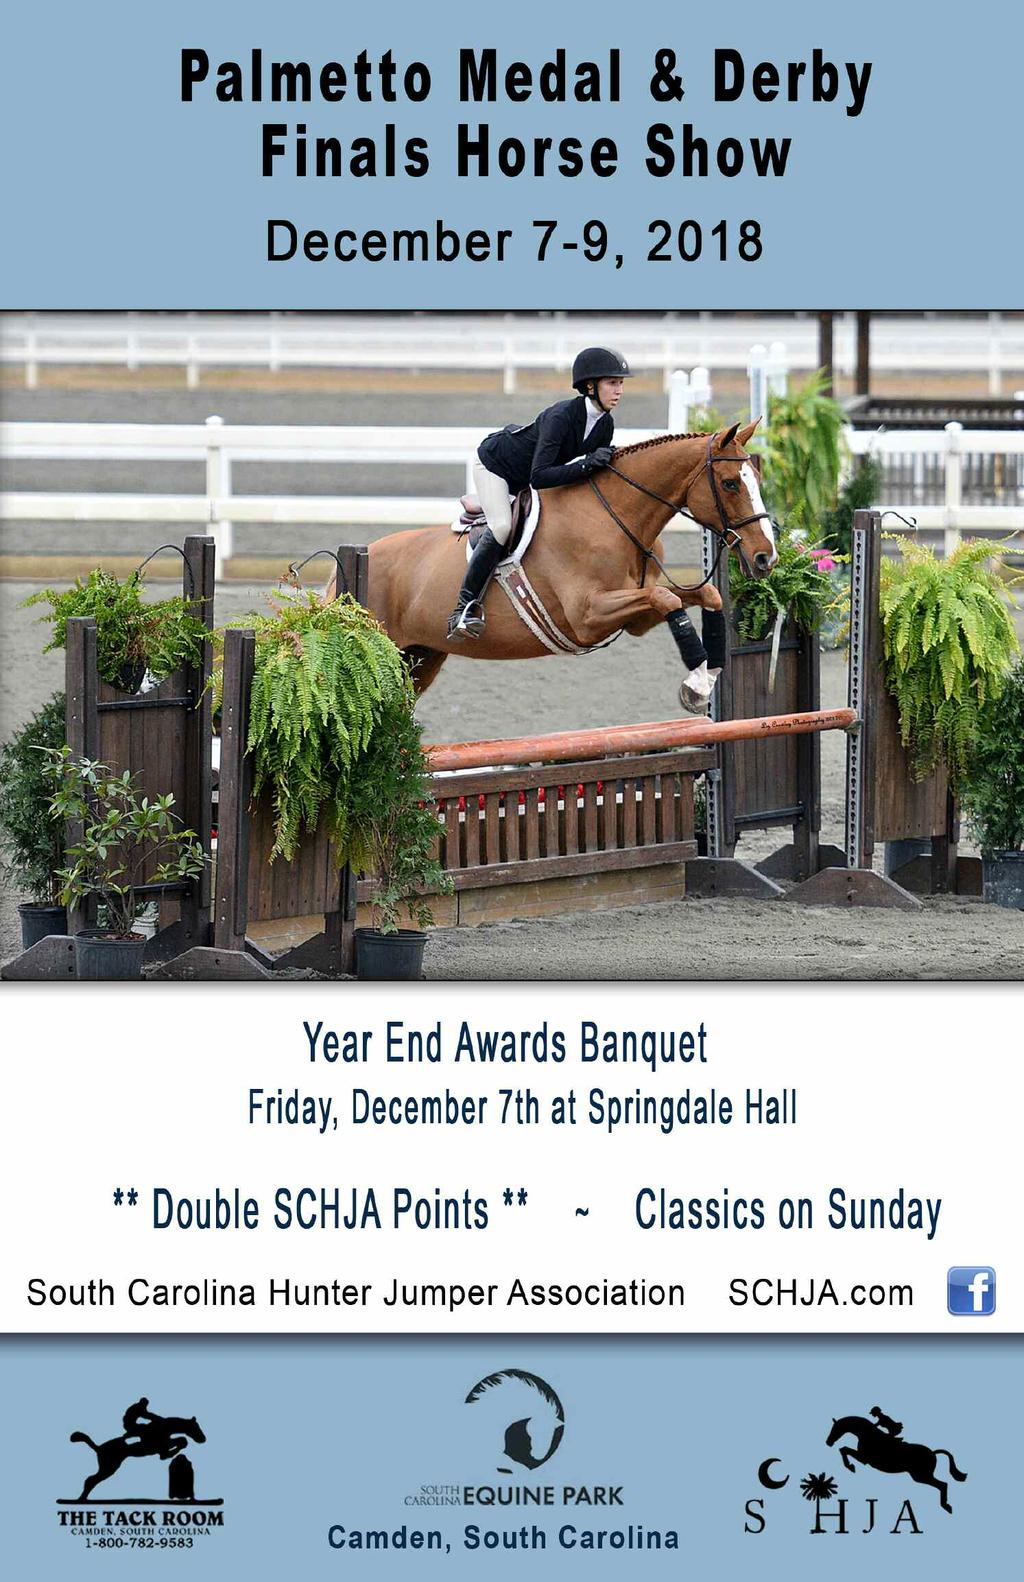 7:00pm ~ Buffet Opens, Tables Called In Order Awards Presentation to follow dinner JOIN US FOR SOCIAL EVENTS DURING THE SHOW AT THE SC EQUINE PARK WELLS FARGO